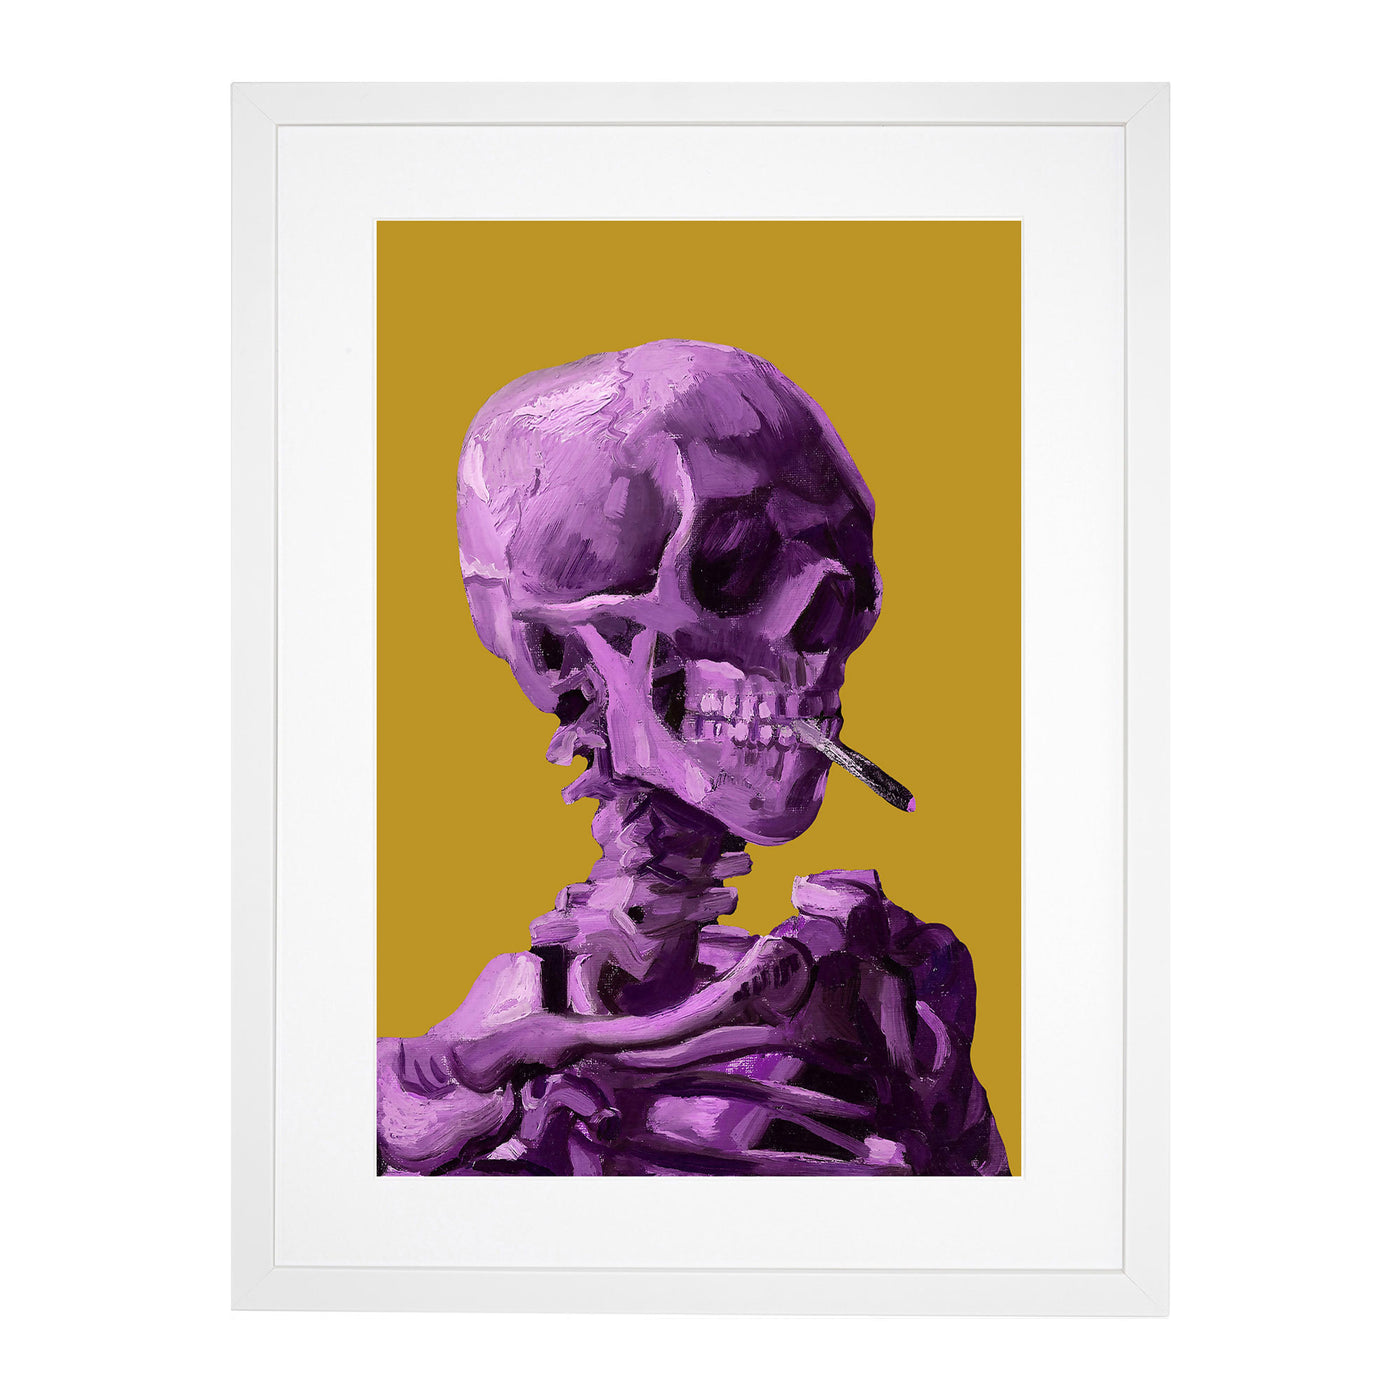 Purple Skull of a Skeleton with Cigarette By Vincent Van Gogh